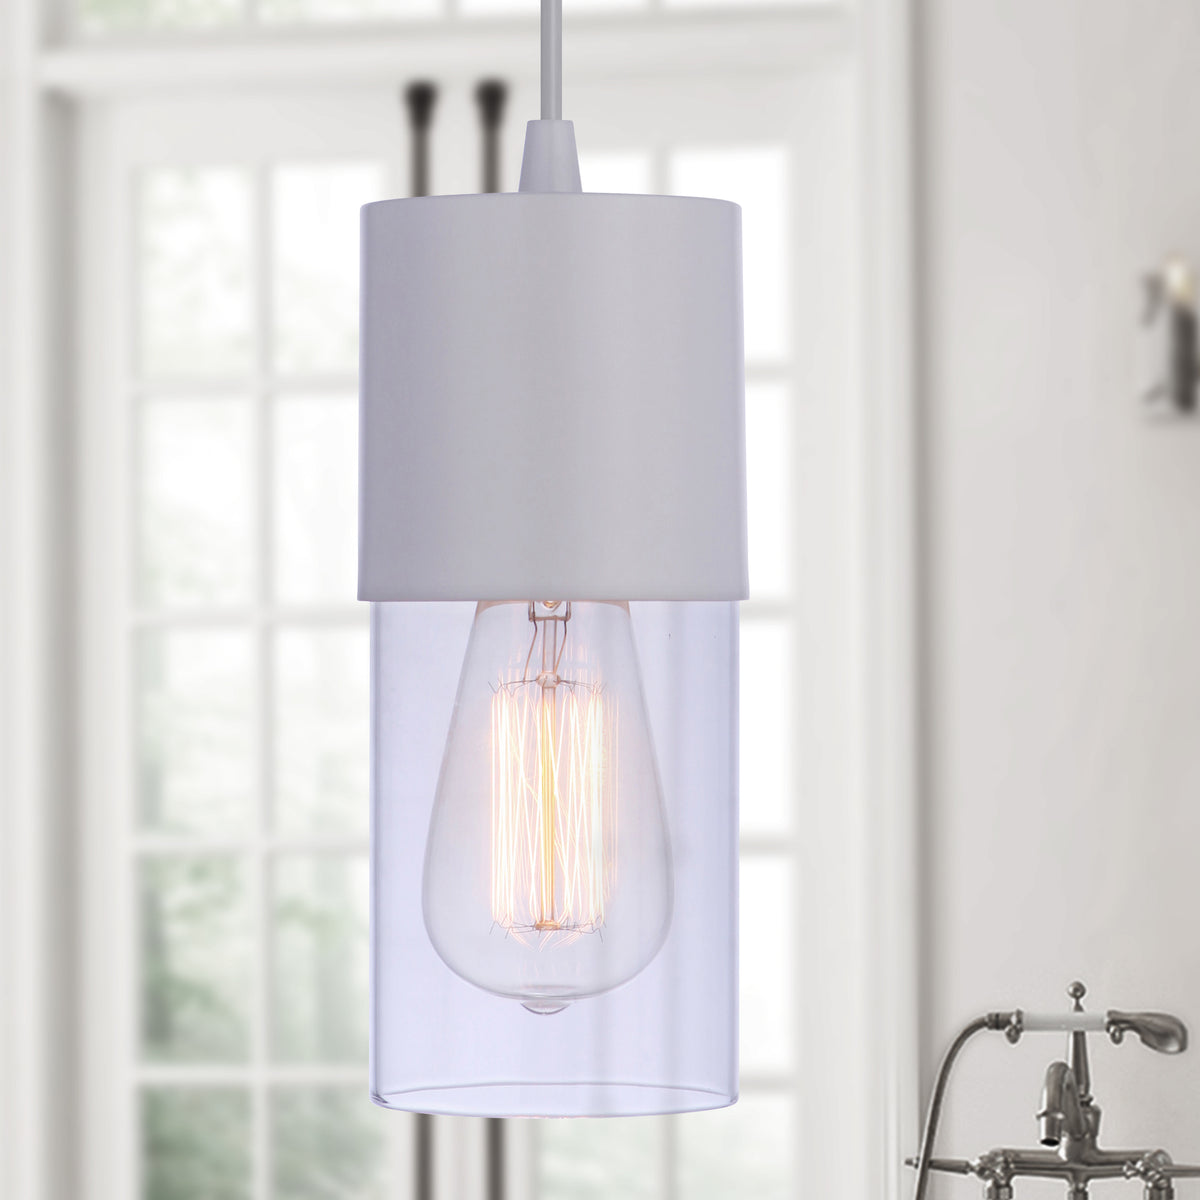 PBN-4551 - Worth Home Products - Small White & Clear Cylinder Instant Pendant - Lifestyle